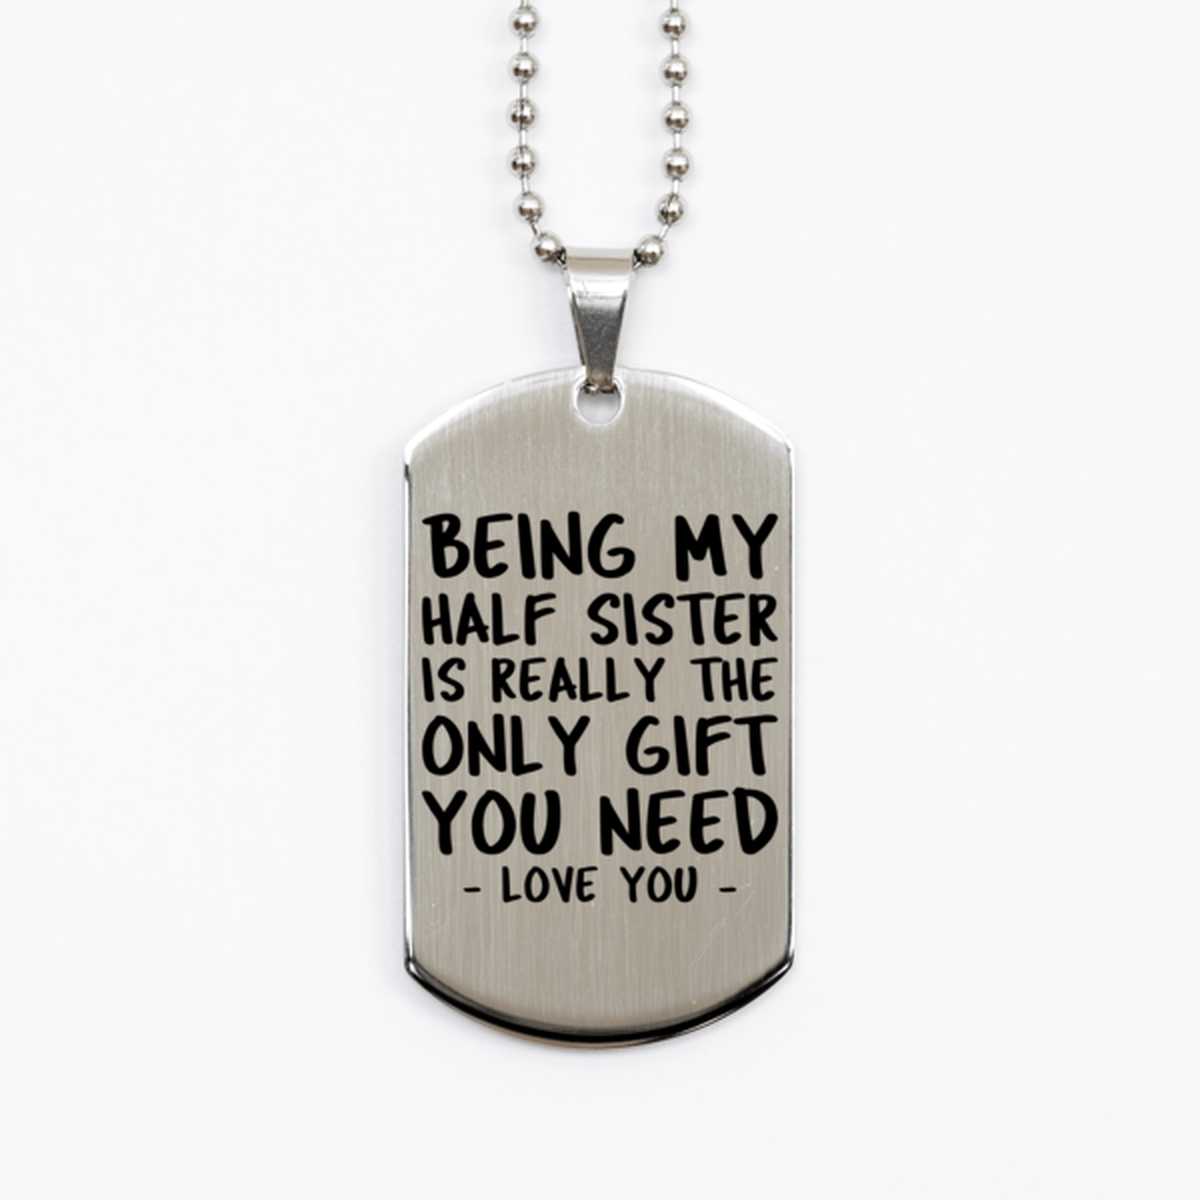 Funny Half Sister Silver Dog Tag Necklace, Being My Half Sister Is Really the Only Gift You Need, Best Birthday Gifts for Half Sister